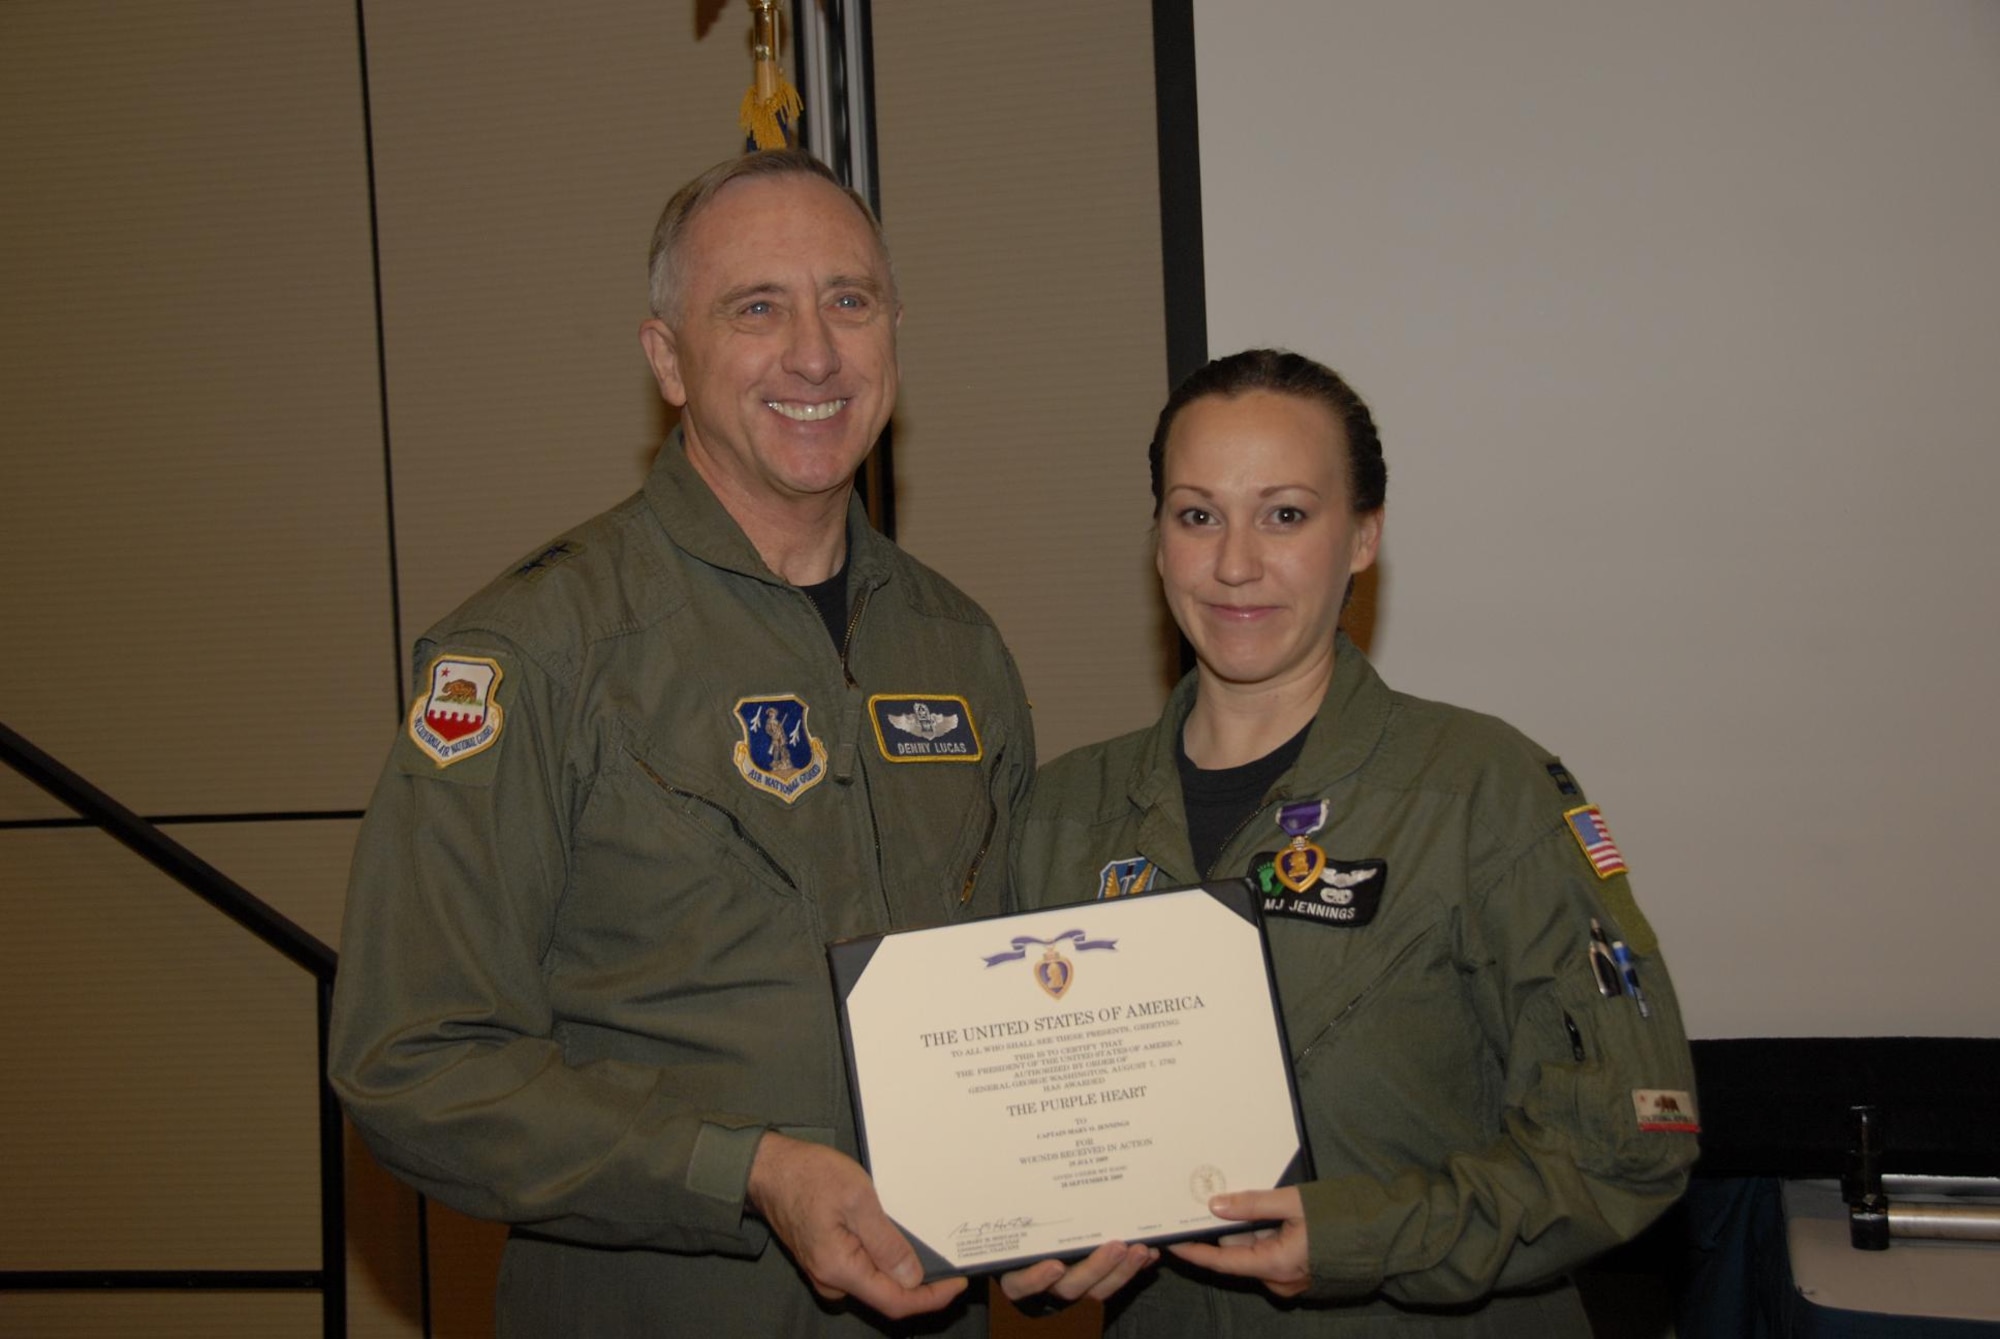 Capt. Mary O. Jennings, 129th Rescue Wing HH-60G Pave Hawk co-pilot, receives the Purple Heart from California Air National Guard Commander, Maj. Gen. Dennis G. Lucas, during an awards ceremony Dec. 6, 2009. Captain Jennings was the recipient of the Purple Heart due to injuries sustained in a July 29, 2009 Afghanistan rescue mission. (Air National Guard photo by Staff Sgt. Kim Ramirez)